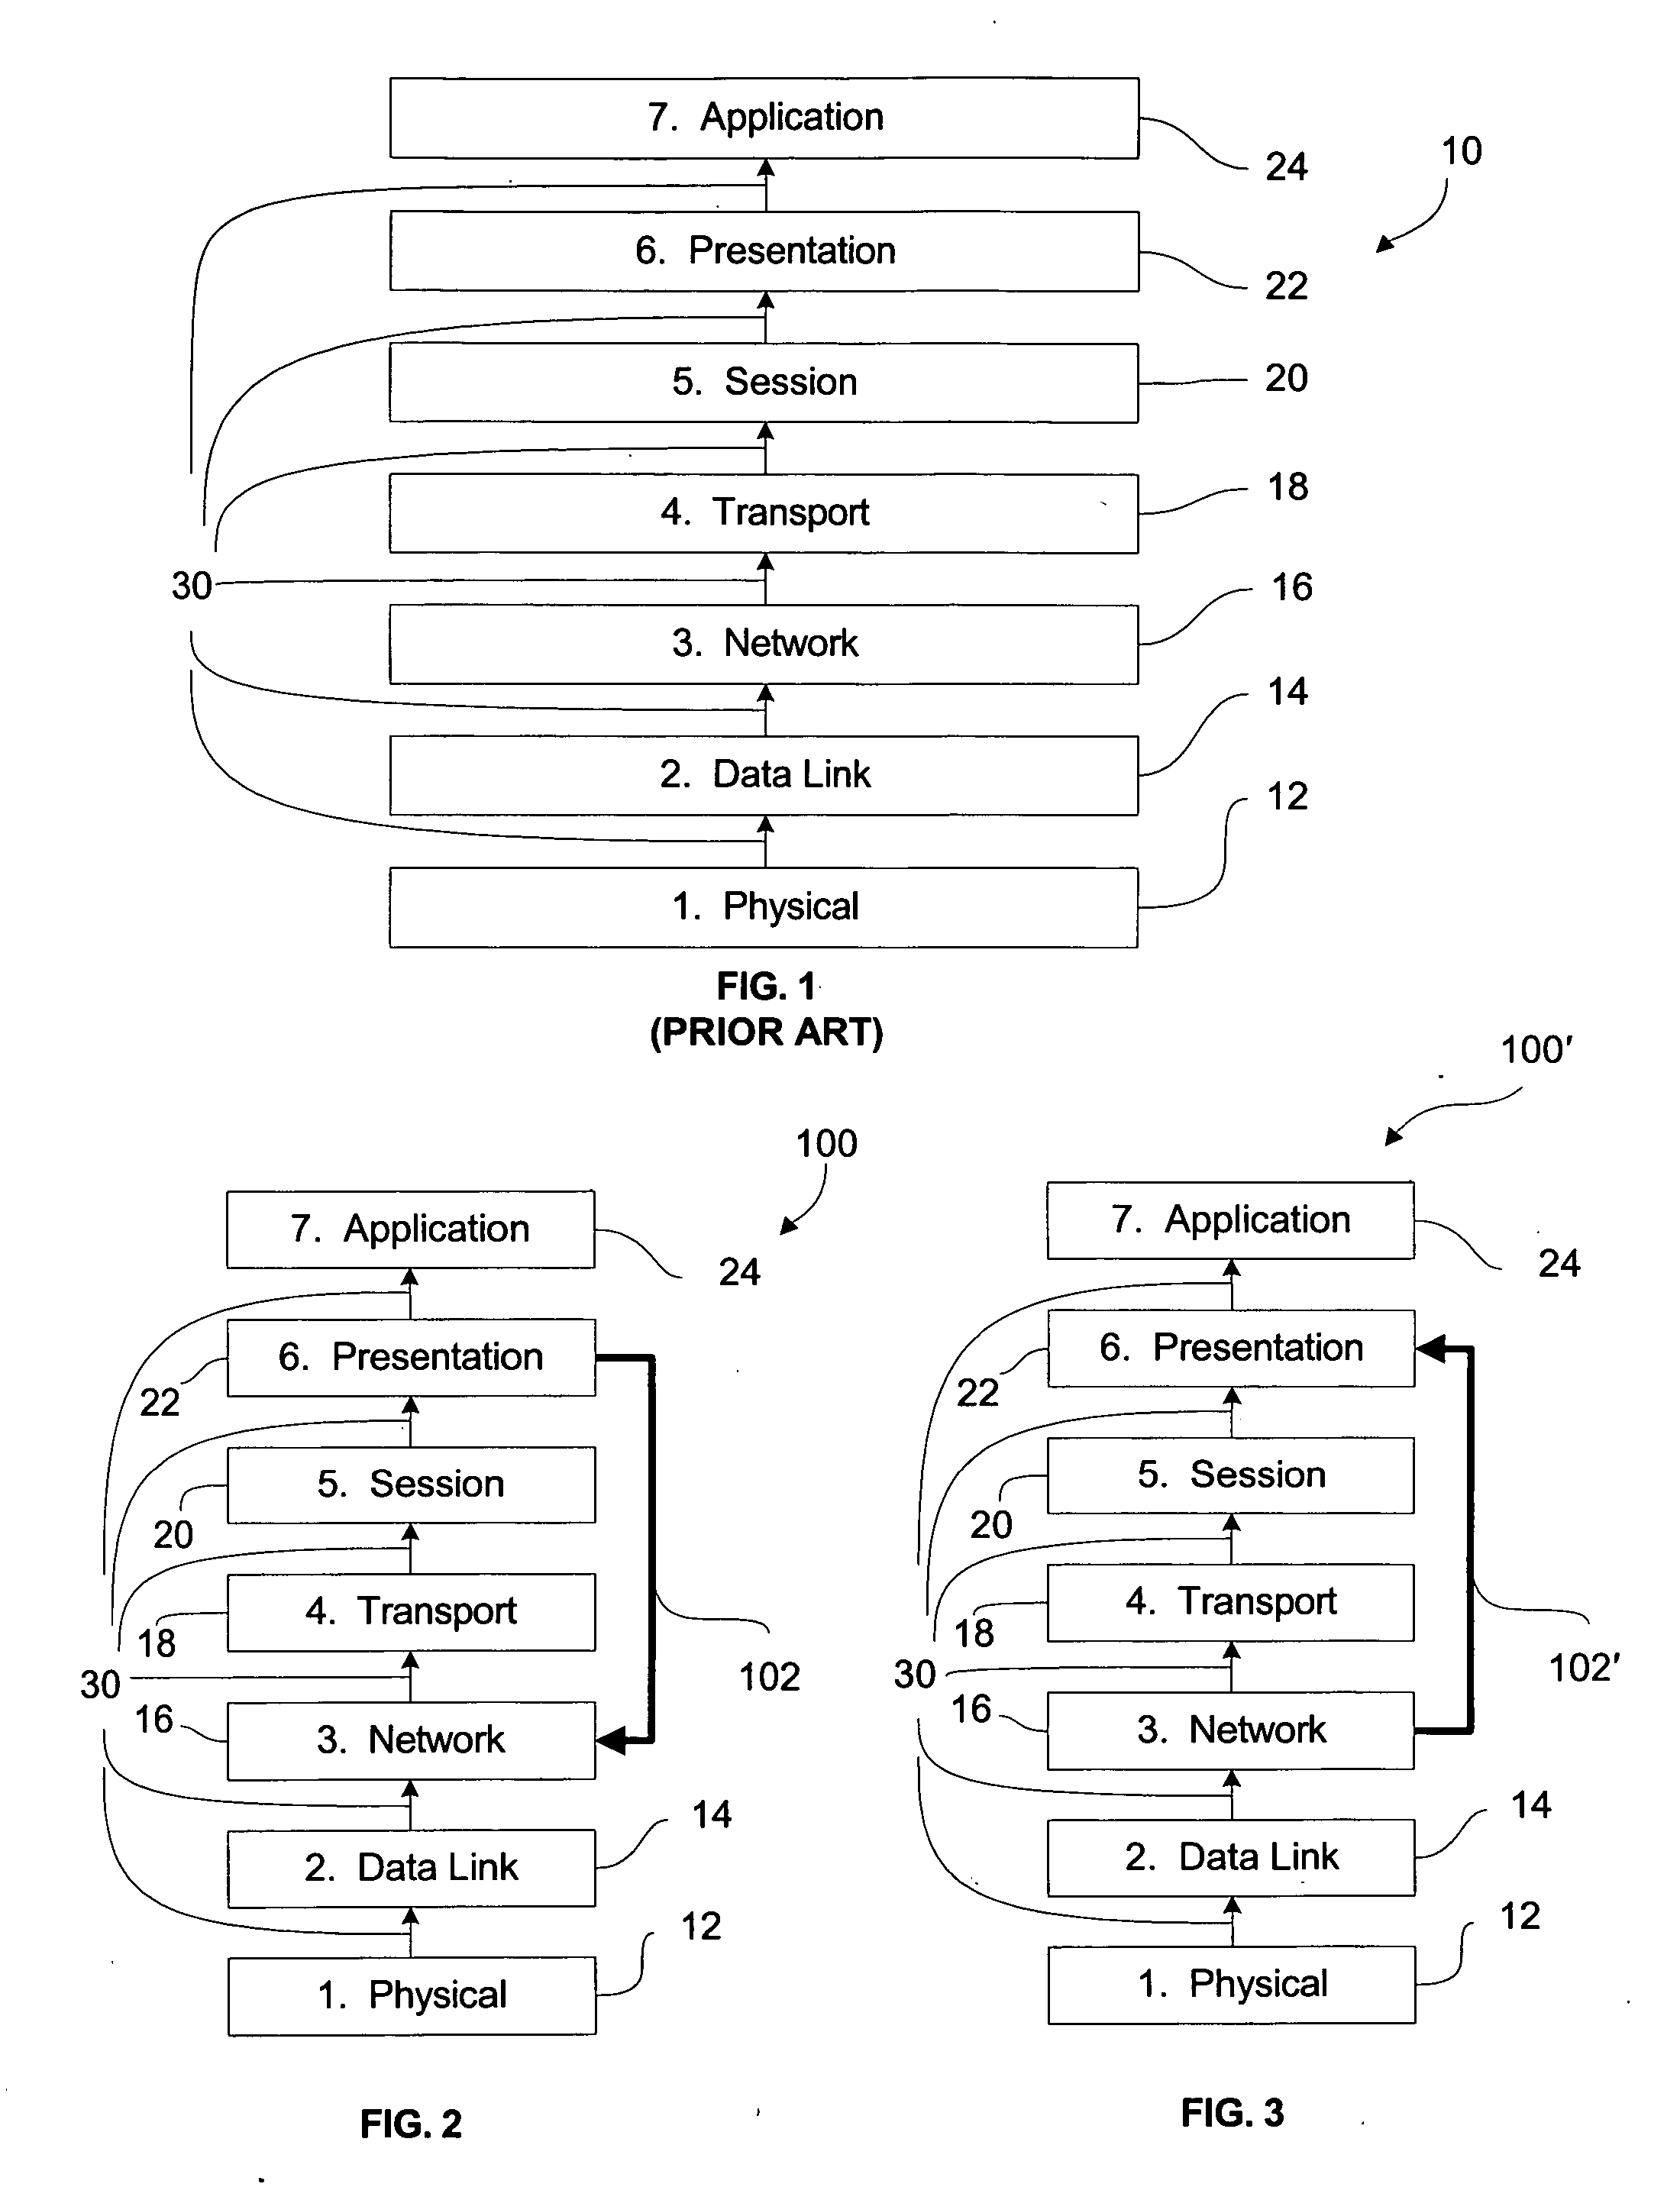 Electronic message delivery system including a network device